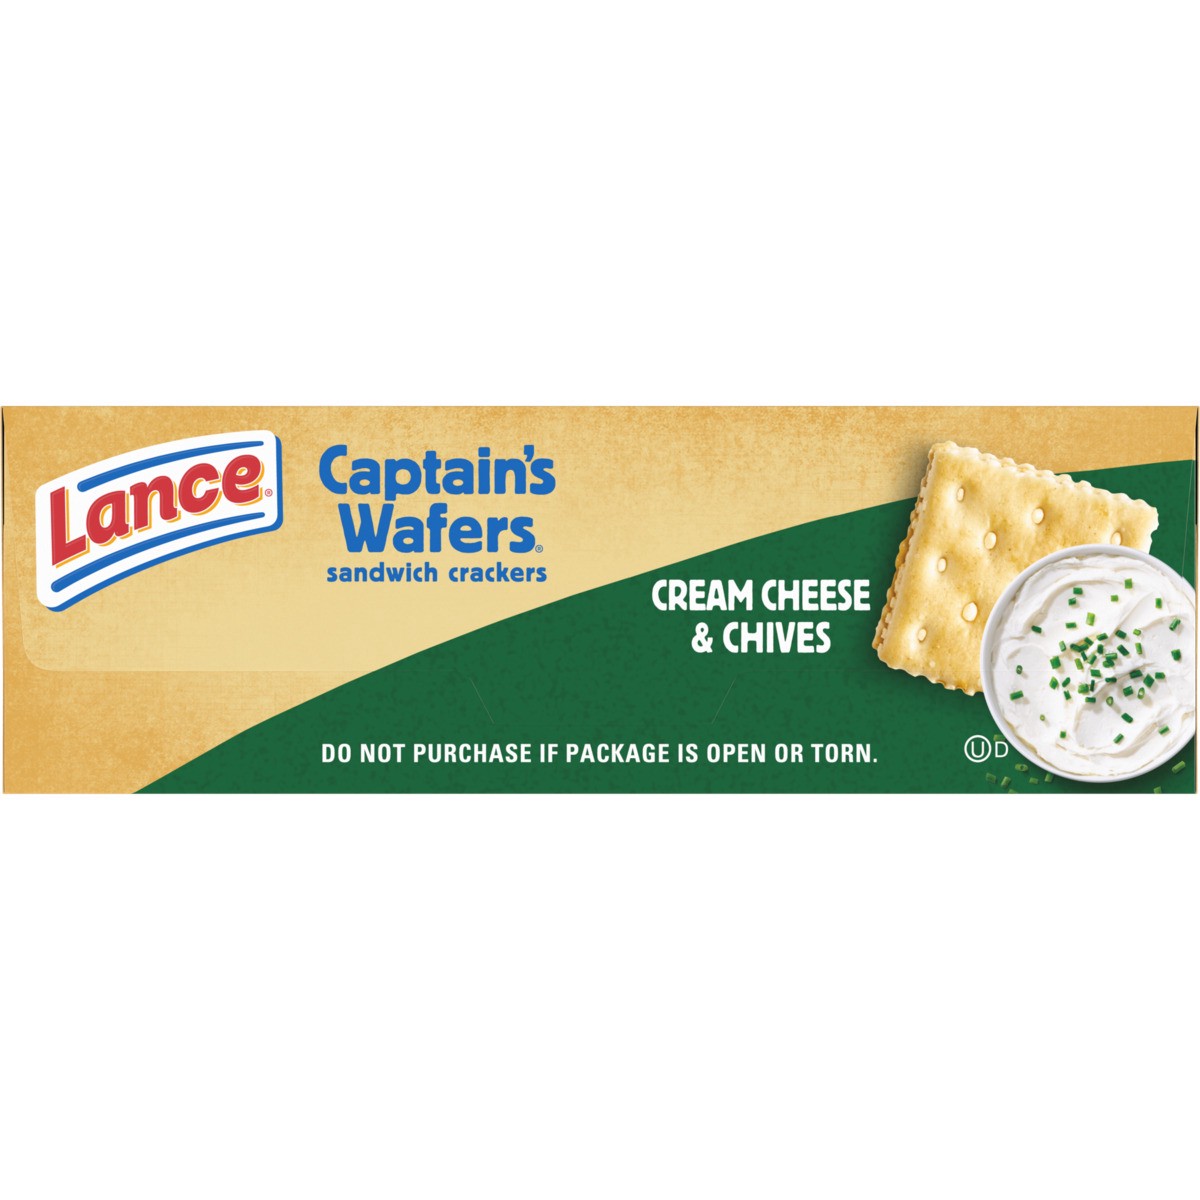 slide 3 of 11, Lance Sandwich Crackers, Captain's Wafers Cream Cheese and Chives, 6 Packs, 4 Sandwiches Each, 5.5 oz